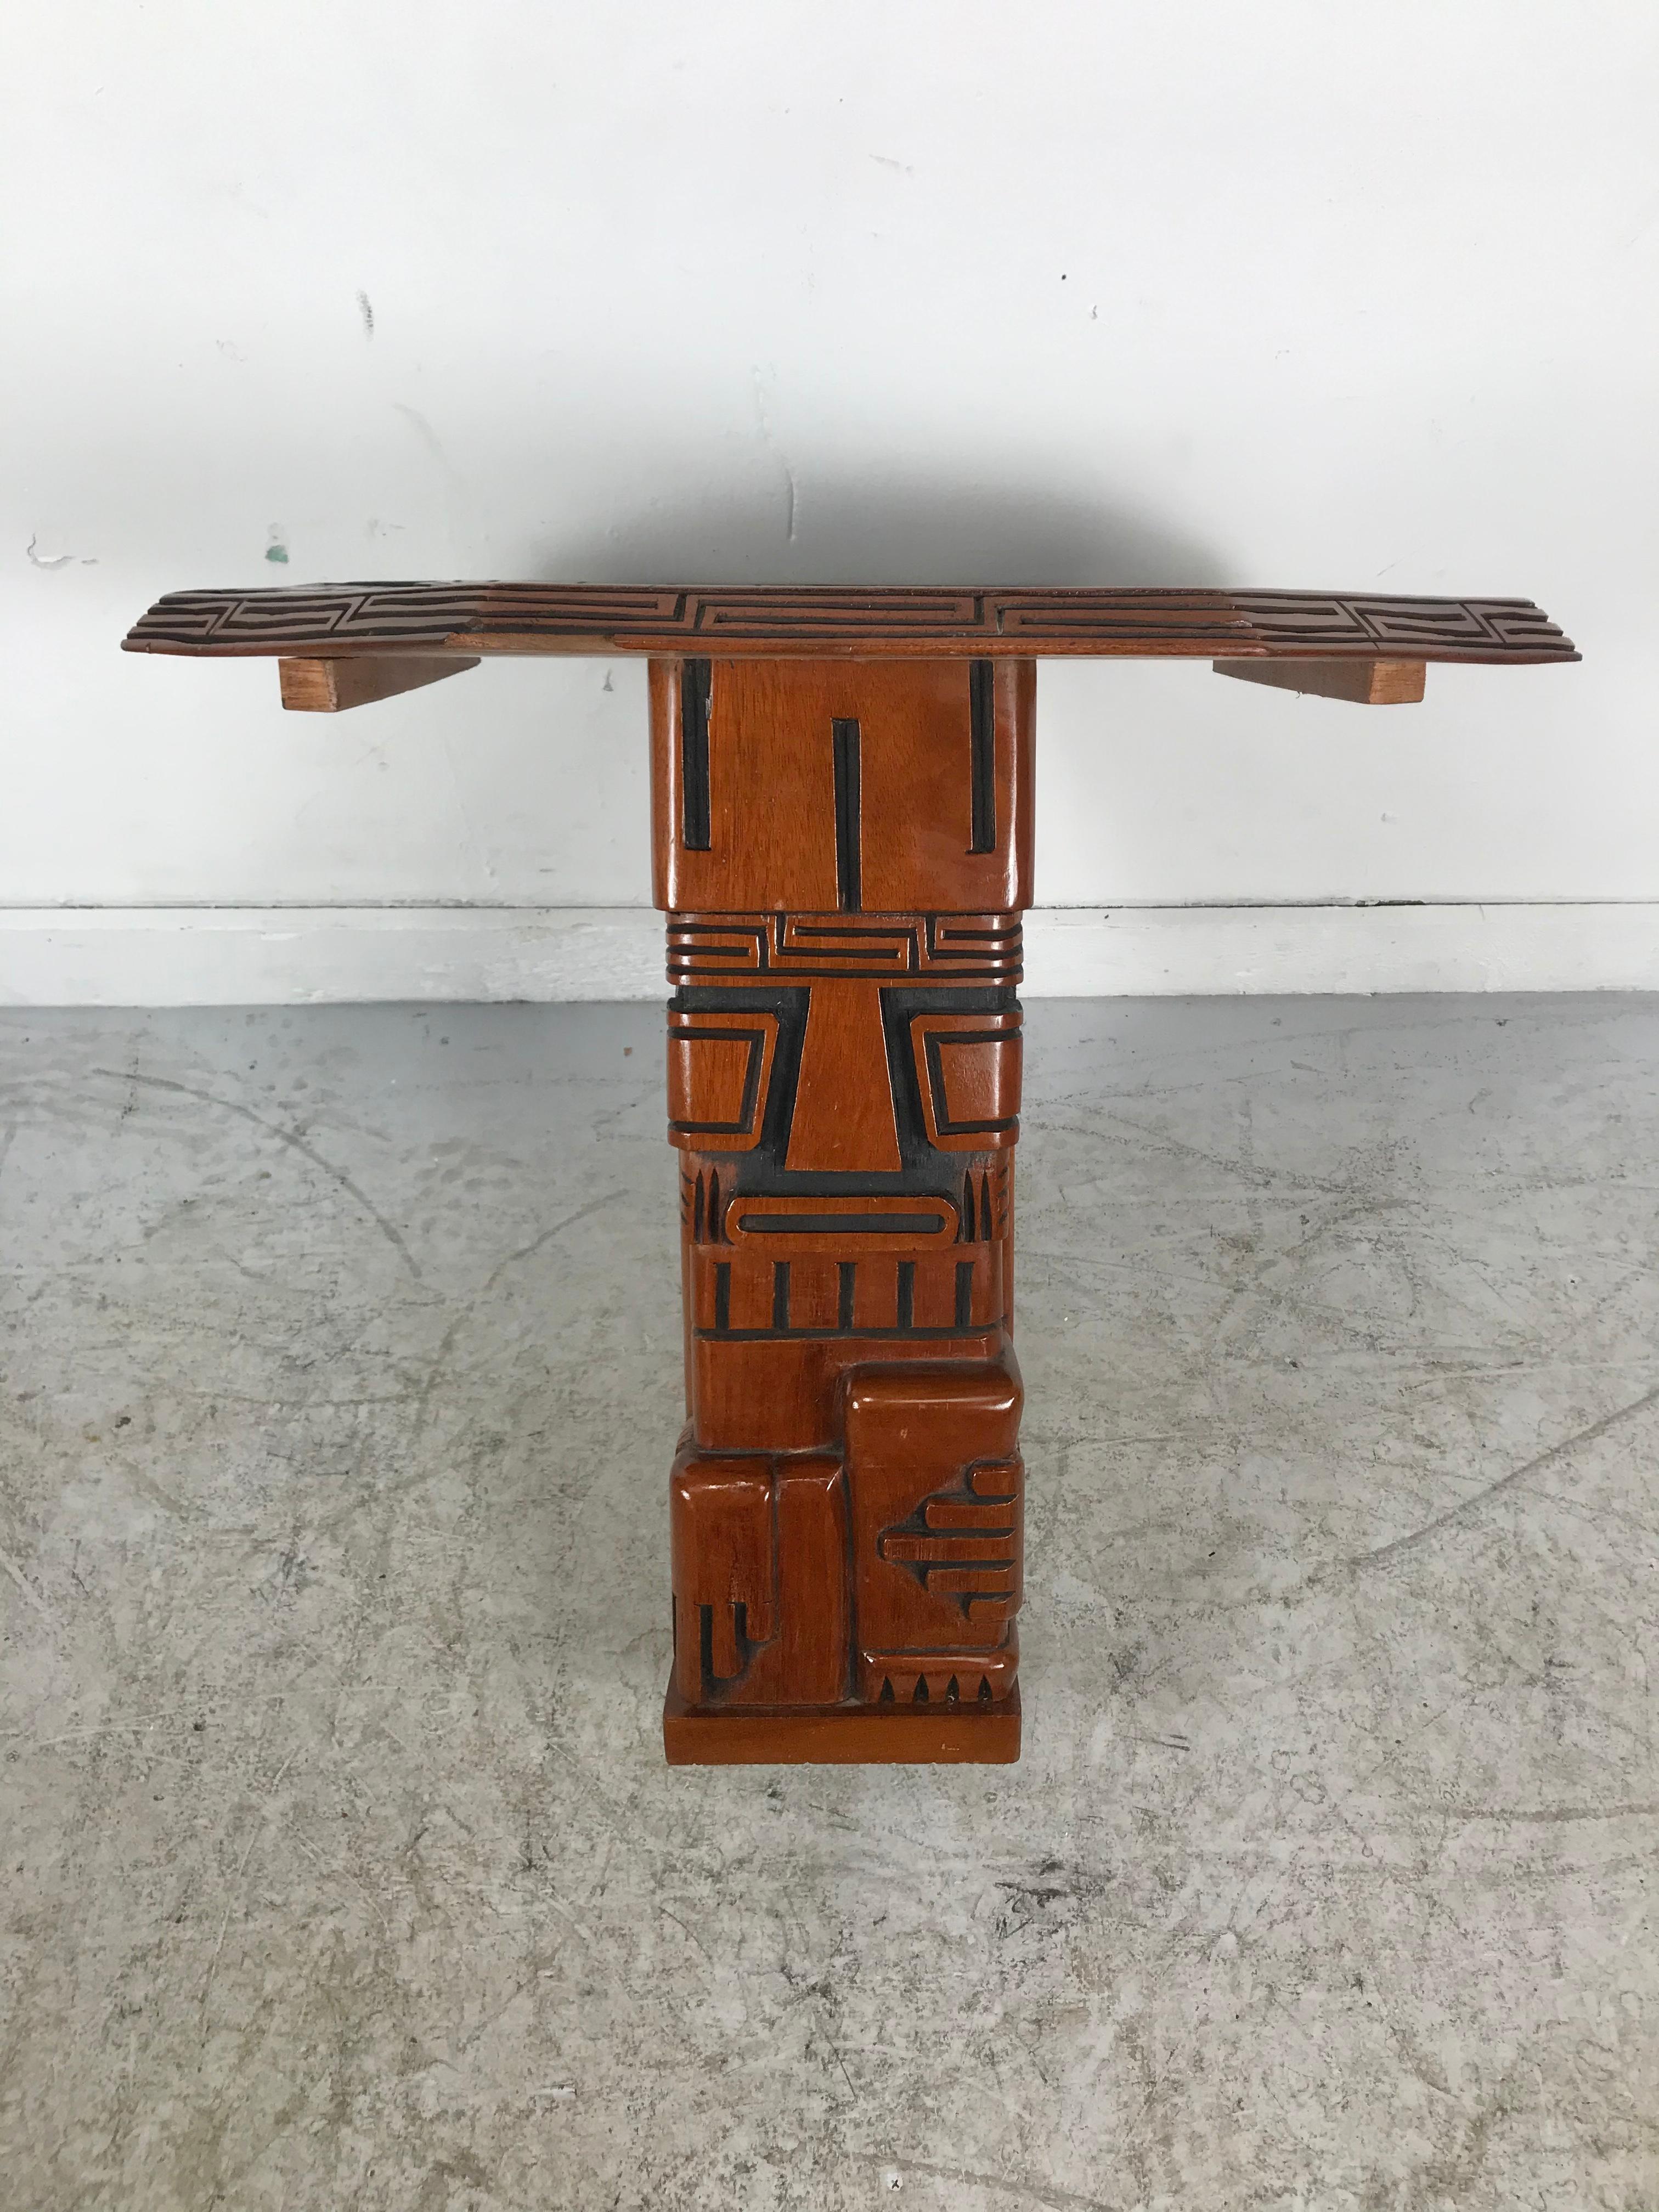 Stylized modernist Aztec hardwood carved chess set. South America, Teki Modern. Beautifully carved, wonderful warm woods and patina. Chess pieces depicting the Incas, Mayans and Aztecs, Great little accent piece.